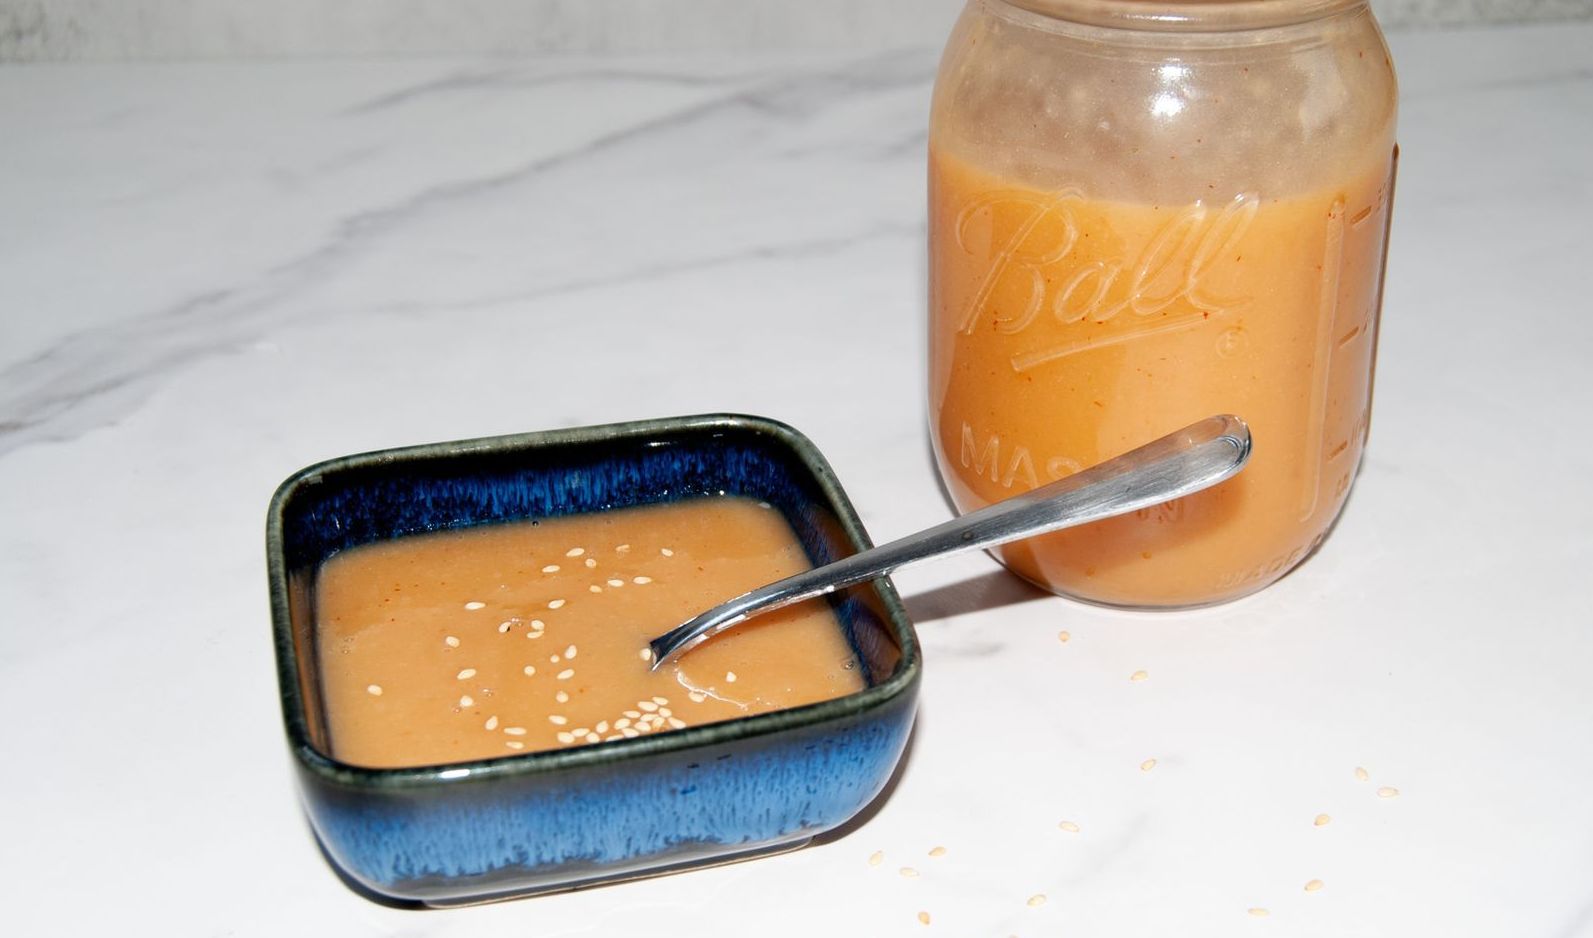 Creamy miso dressing in a small blue bowl with a spoon, garnished with sesame seeds. A jar of dressing in the background.